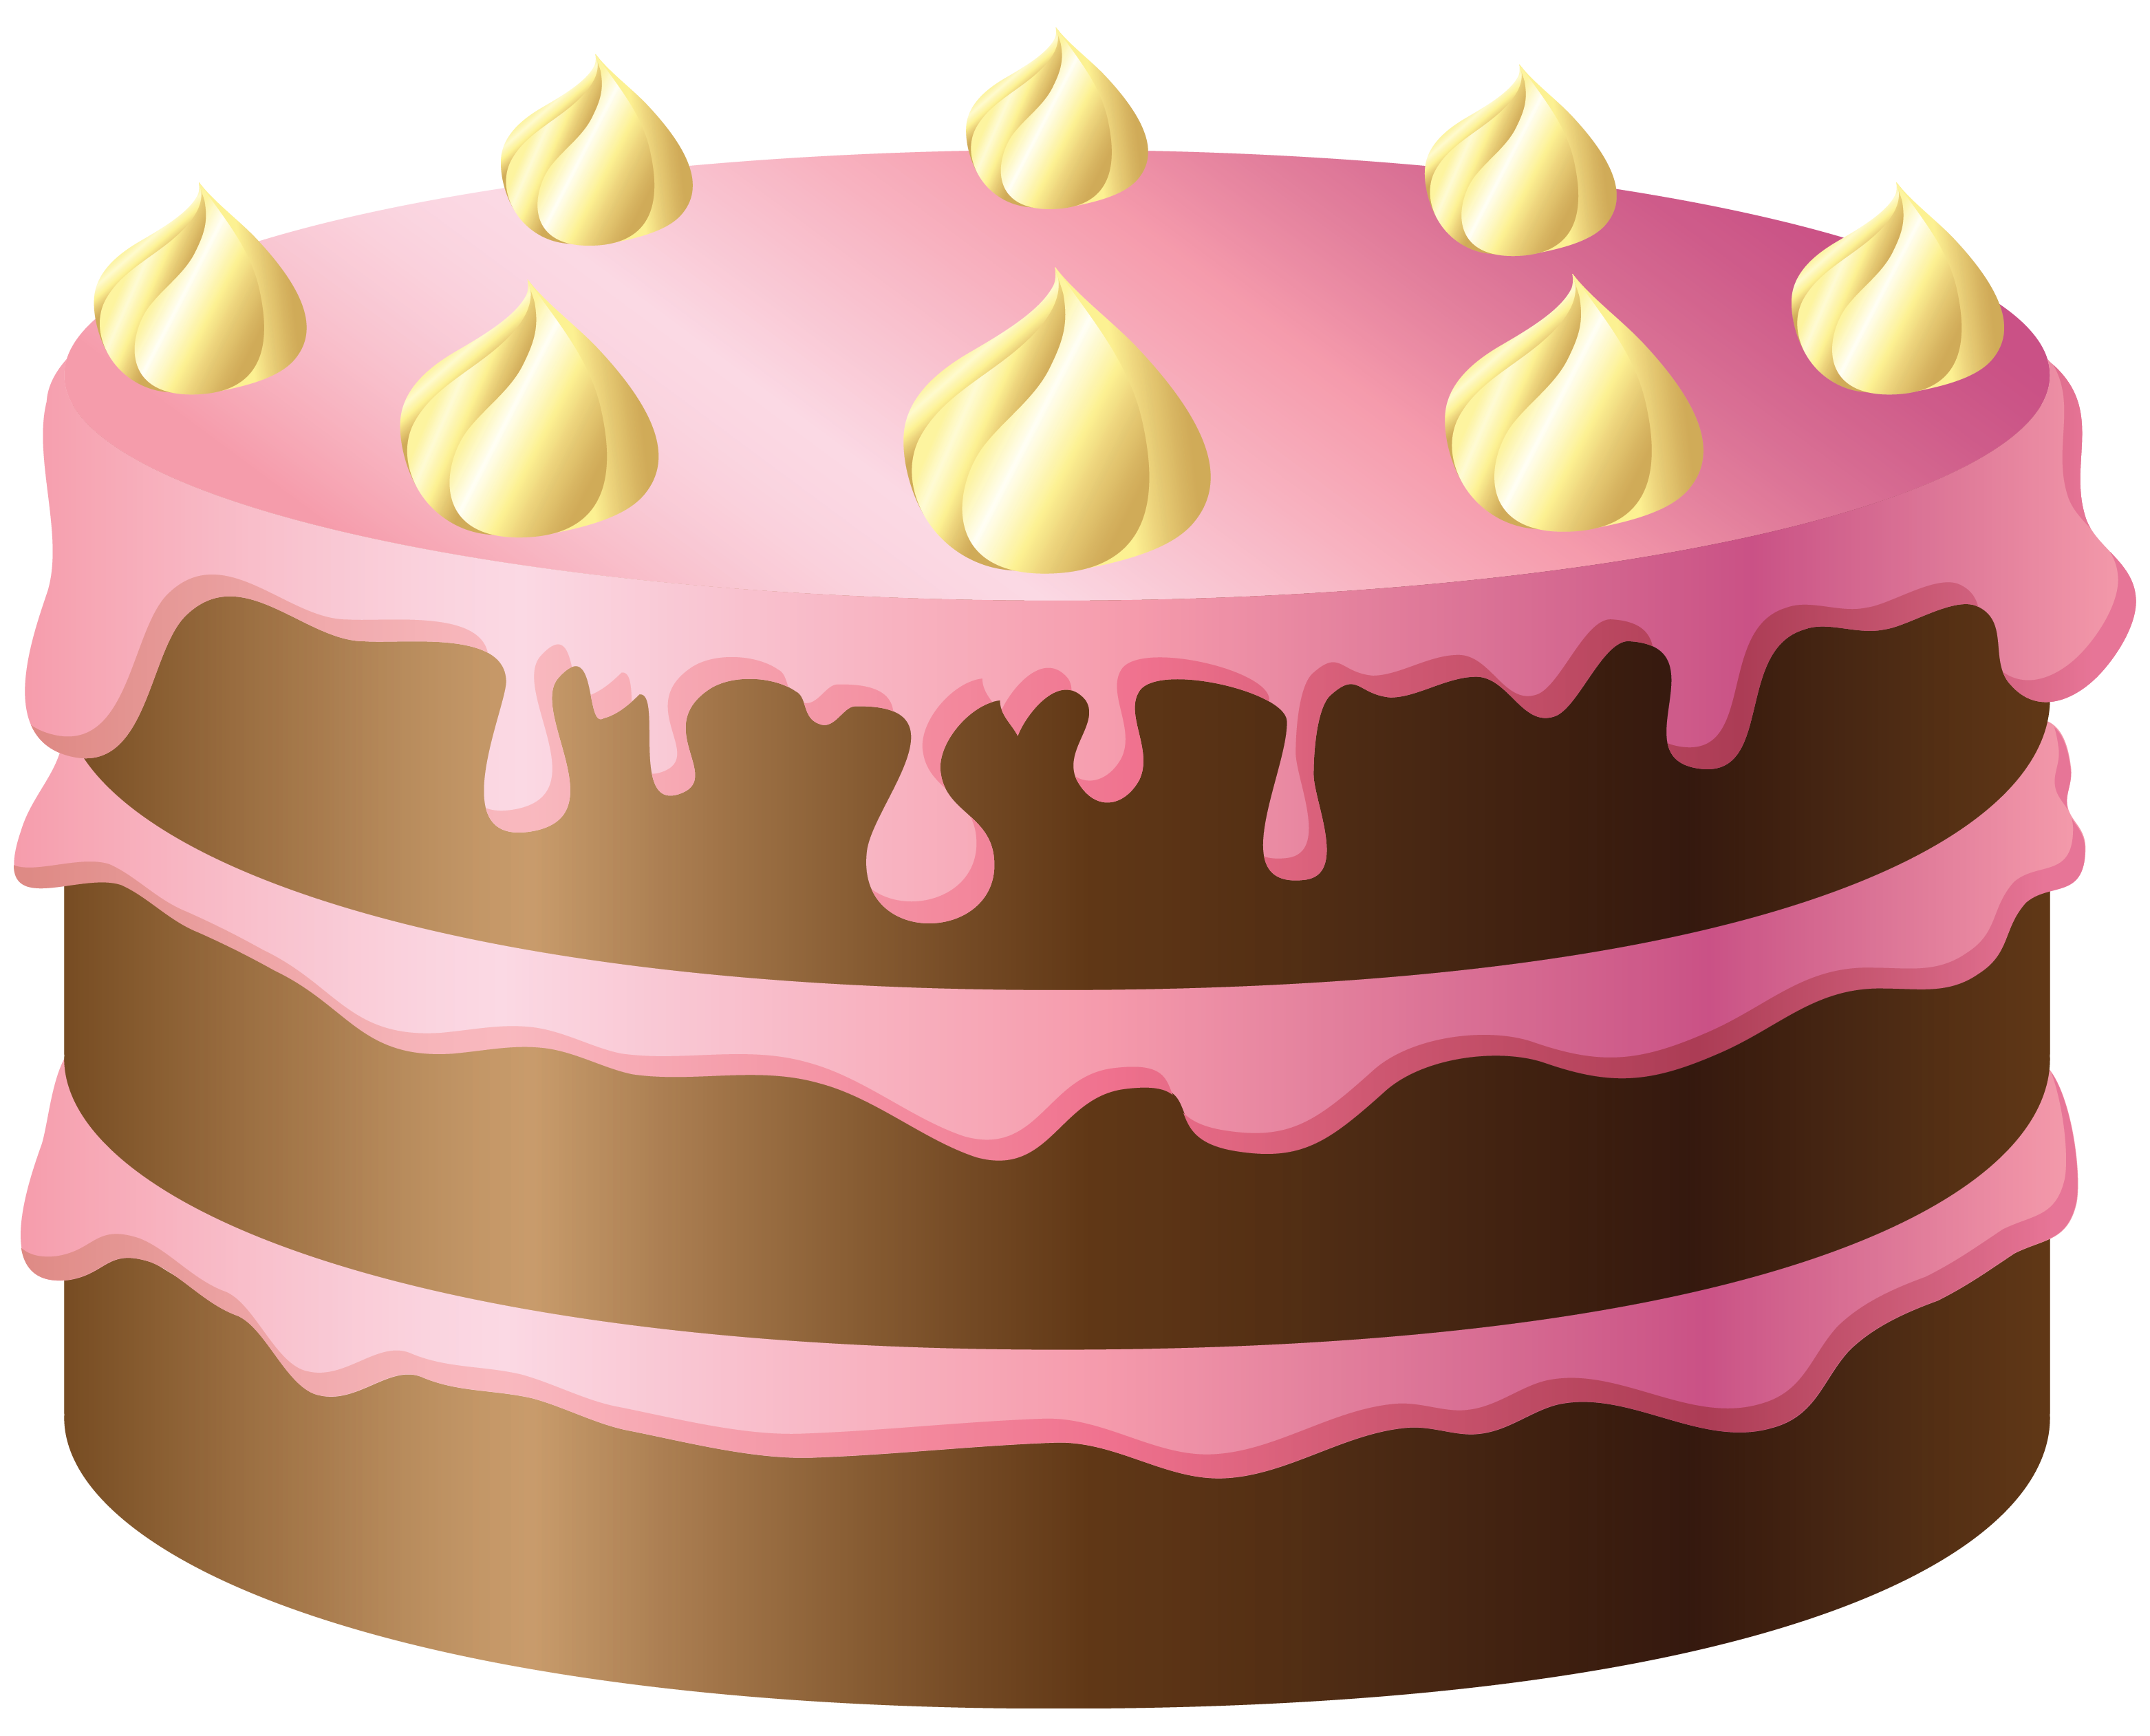 1st birthday cake clipart free clipart images 3 clipartcow